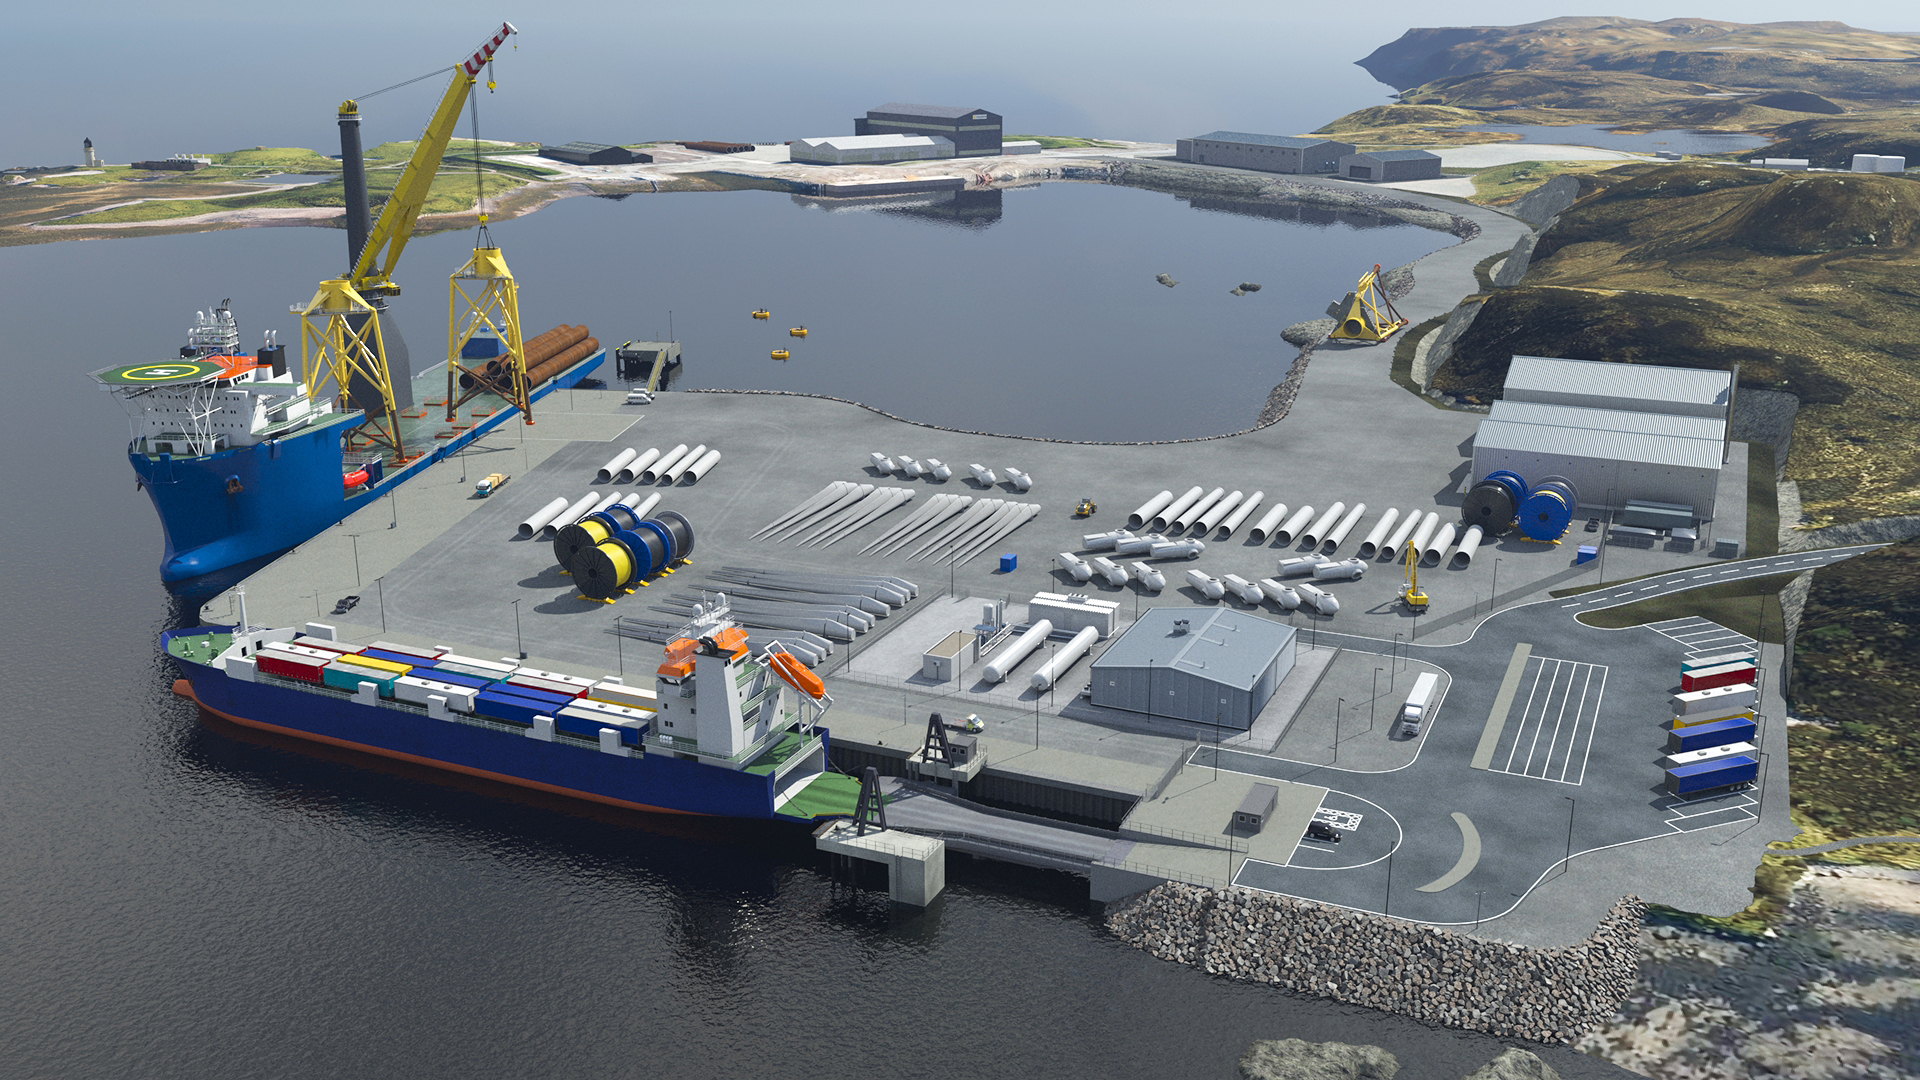 Construction contract signed for new £ 49m Deep Water Terminal that will boost Outer Hebrides economy